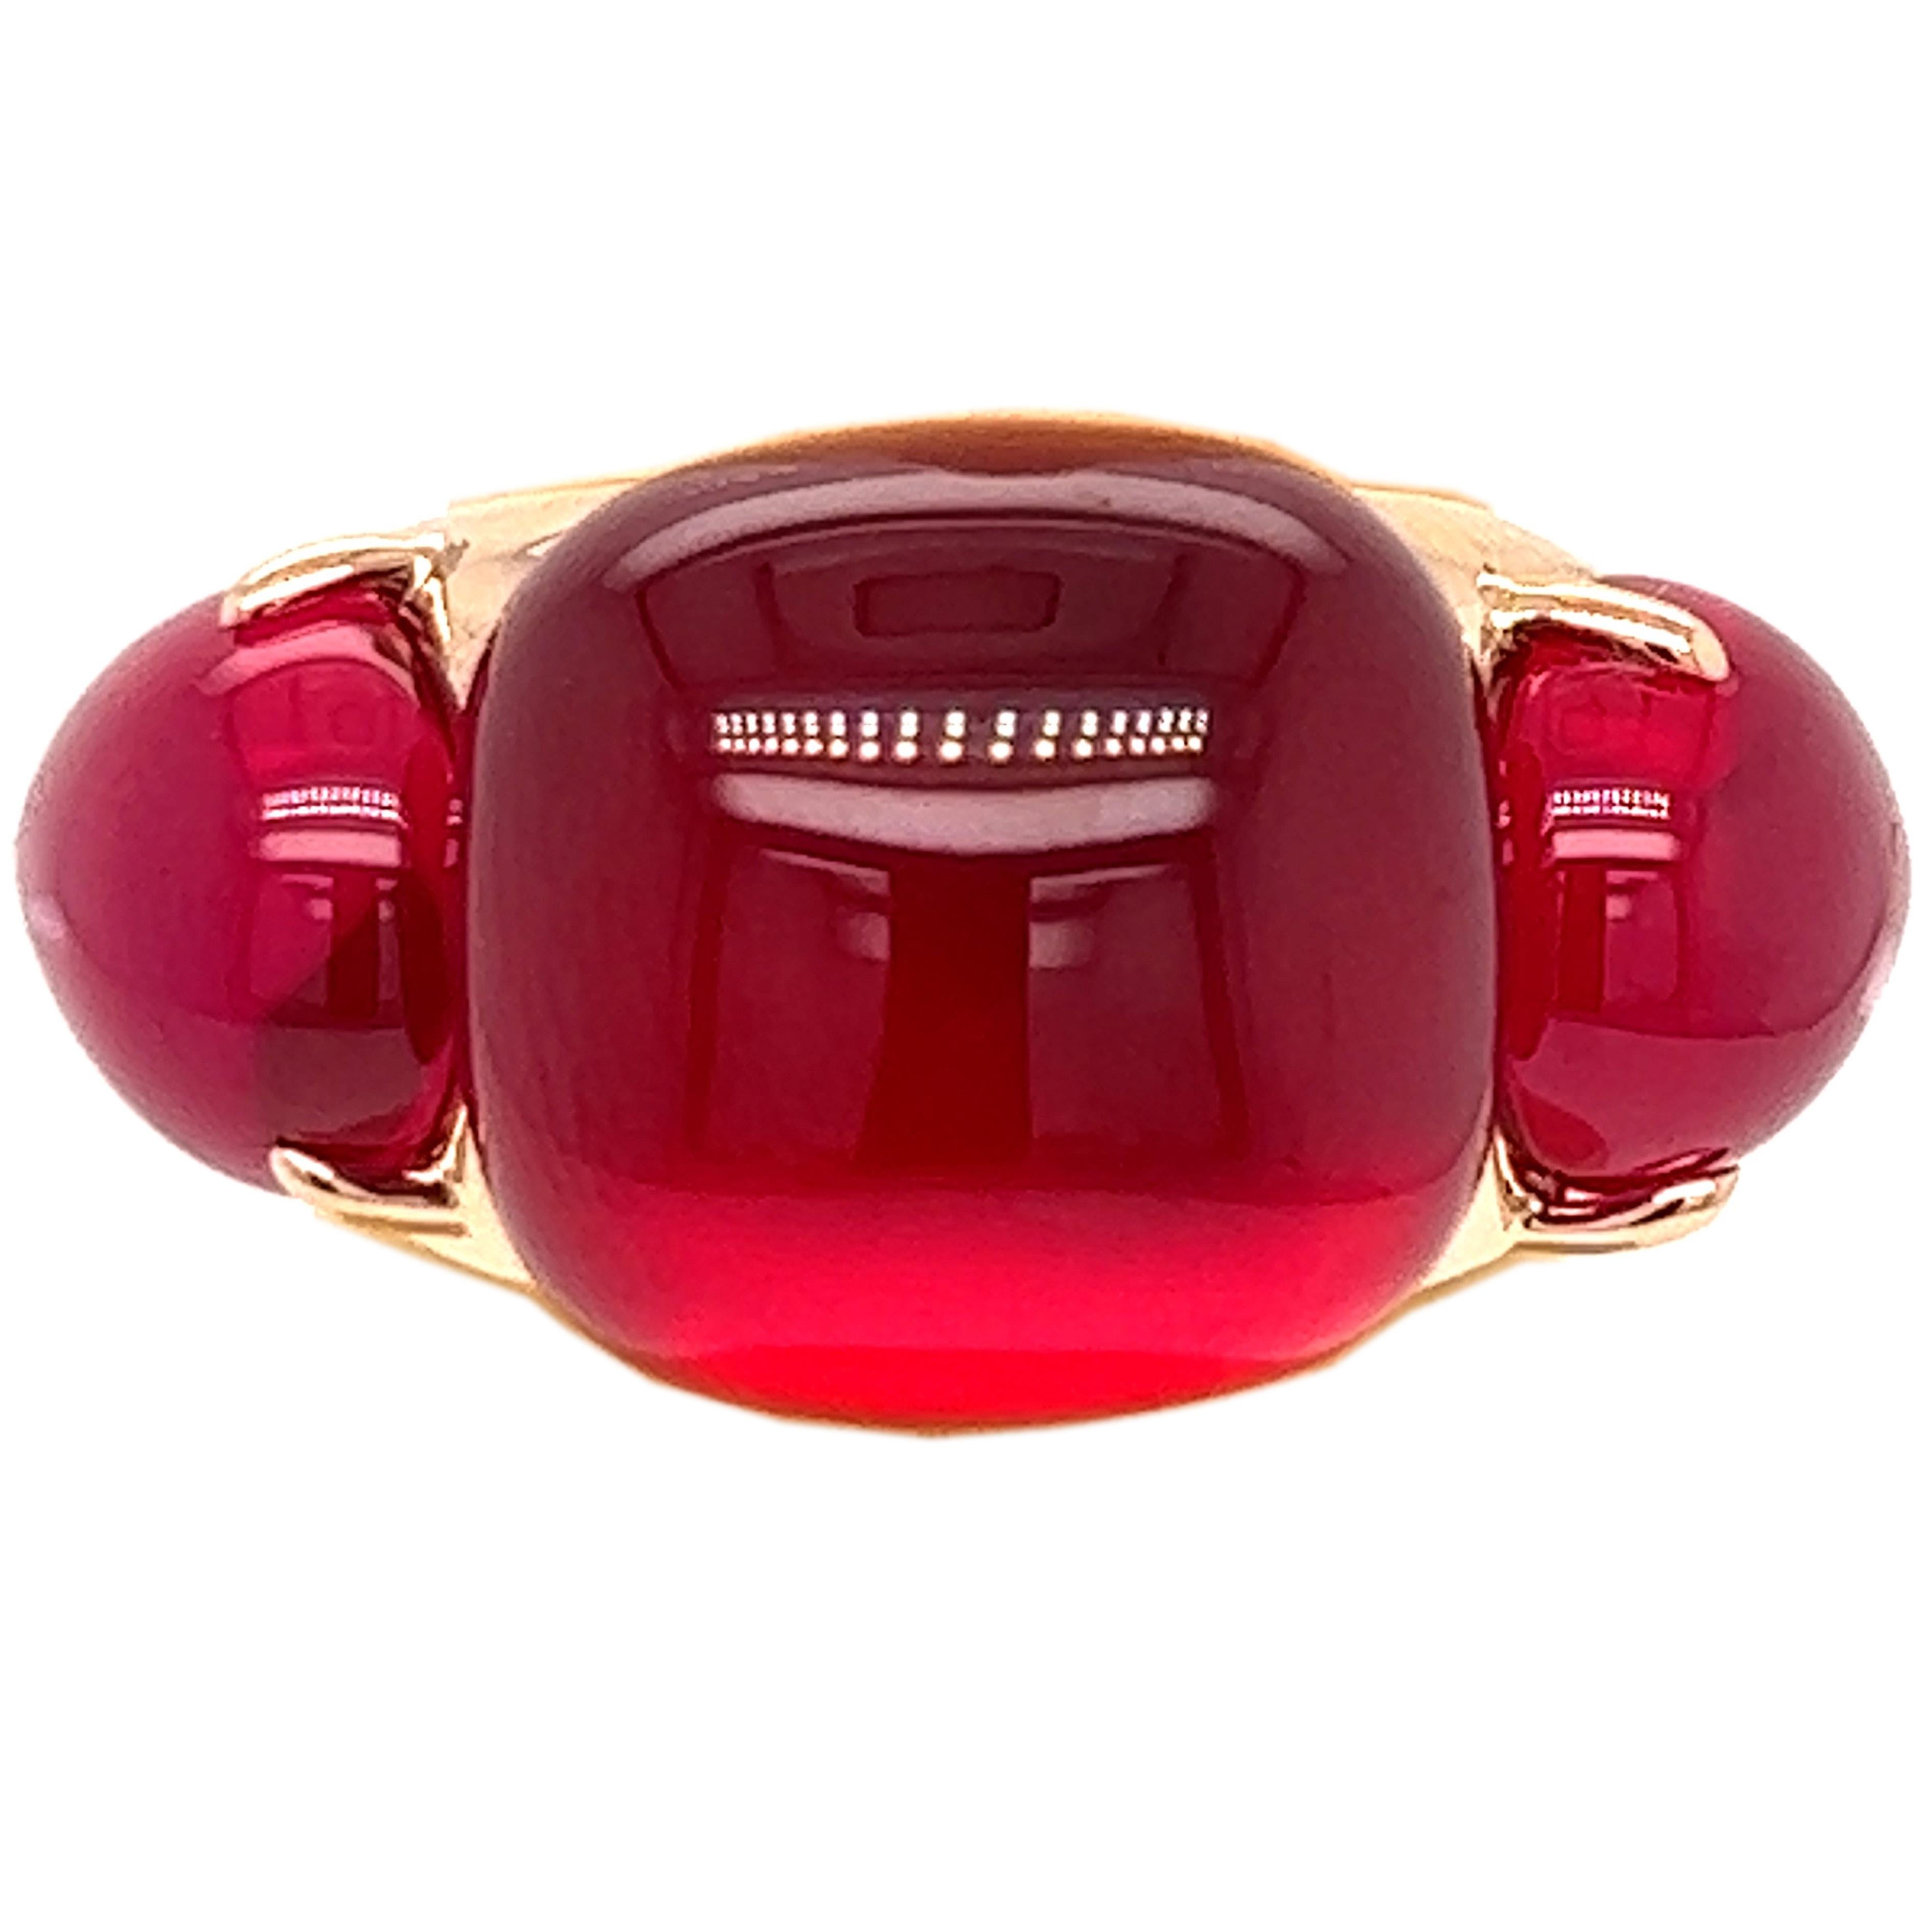 One-of-a-kind, 2013 Precious Hand Inlaid Cabochon Cut Red Sapphire flanked by two Red Sapphire Cabochon Drop, Solid Rose Gold Setting(0.52OzT, 16.10g): this stunning piece is part of iconic  Rouge Passion Collection.
A warm, feminine jewel inspired